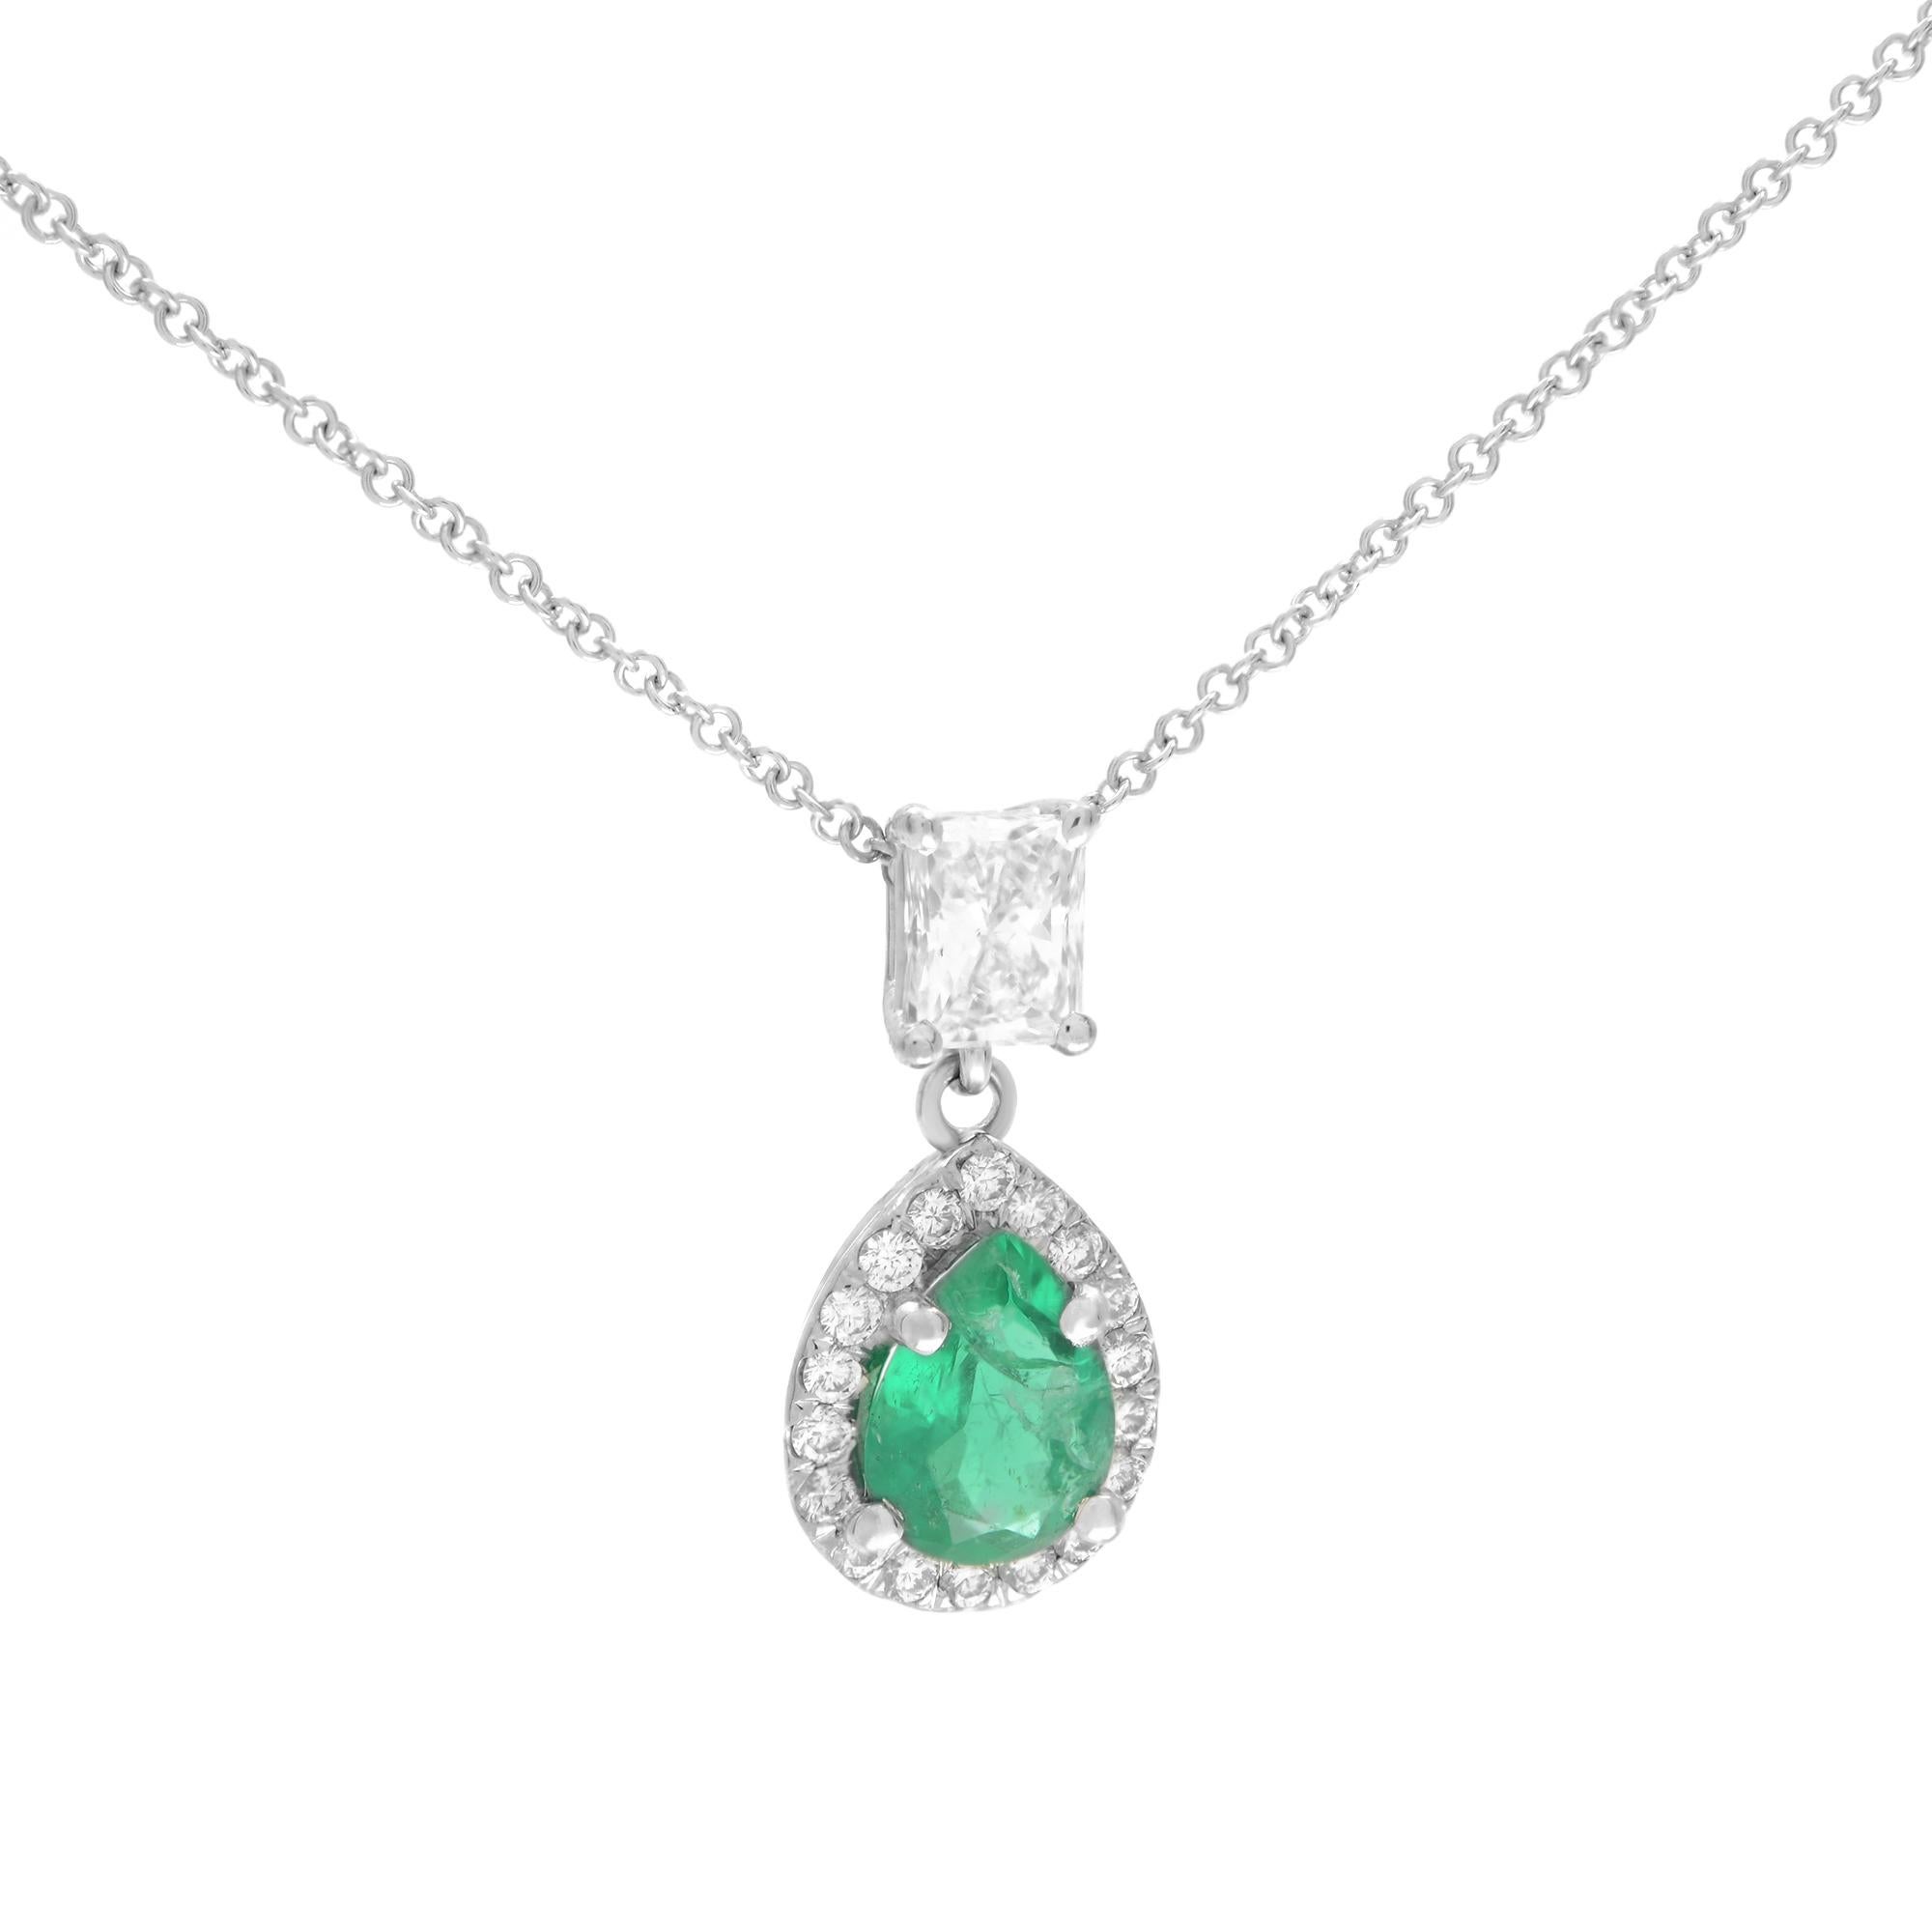 This classic pendant features a 0.83 carat pear-shaped green emerald with a diamond halo secured in a prong setting. A brilliant 0.53 carat radiant diamond sits atop the lush green gemstone adding to the design's beauty. Simple yet alluring, this